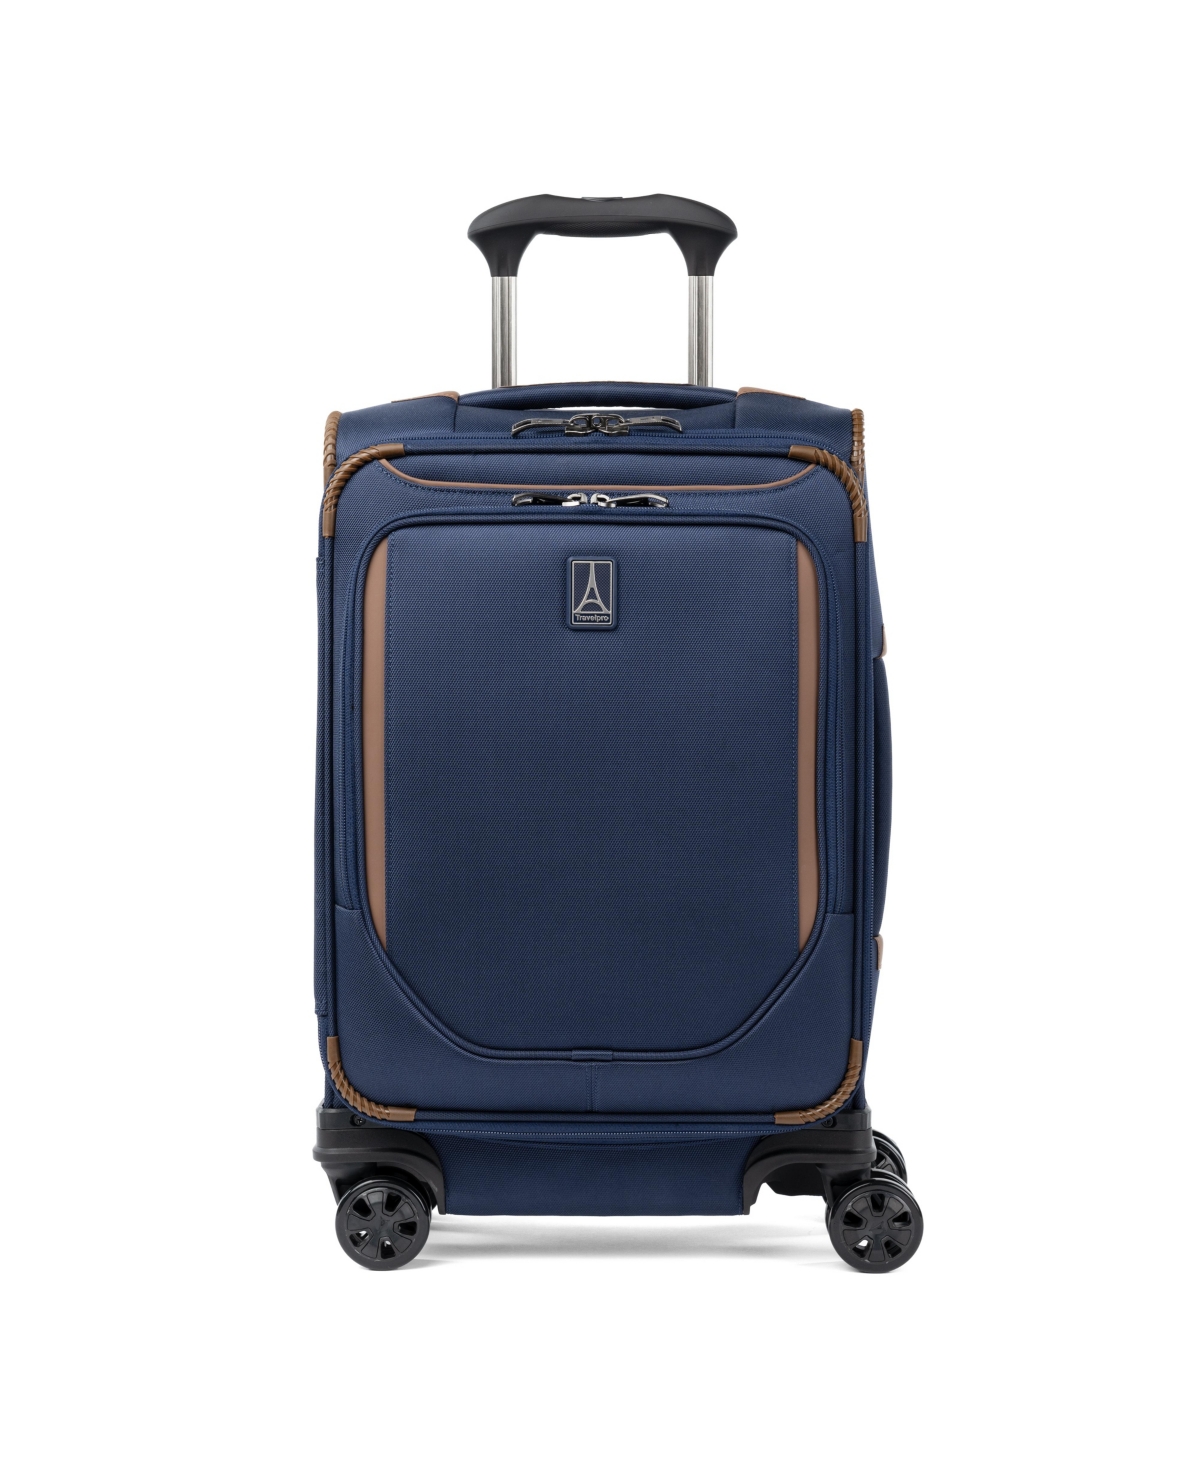 Shop Travelpro New!  Crew Classic Compact Carry-on Expandable Spinner Luggage In Patriot Blue